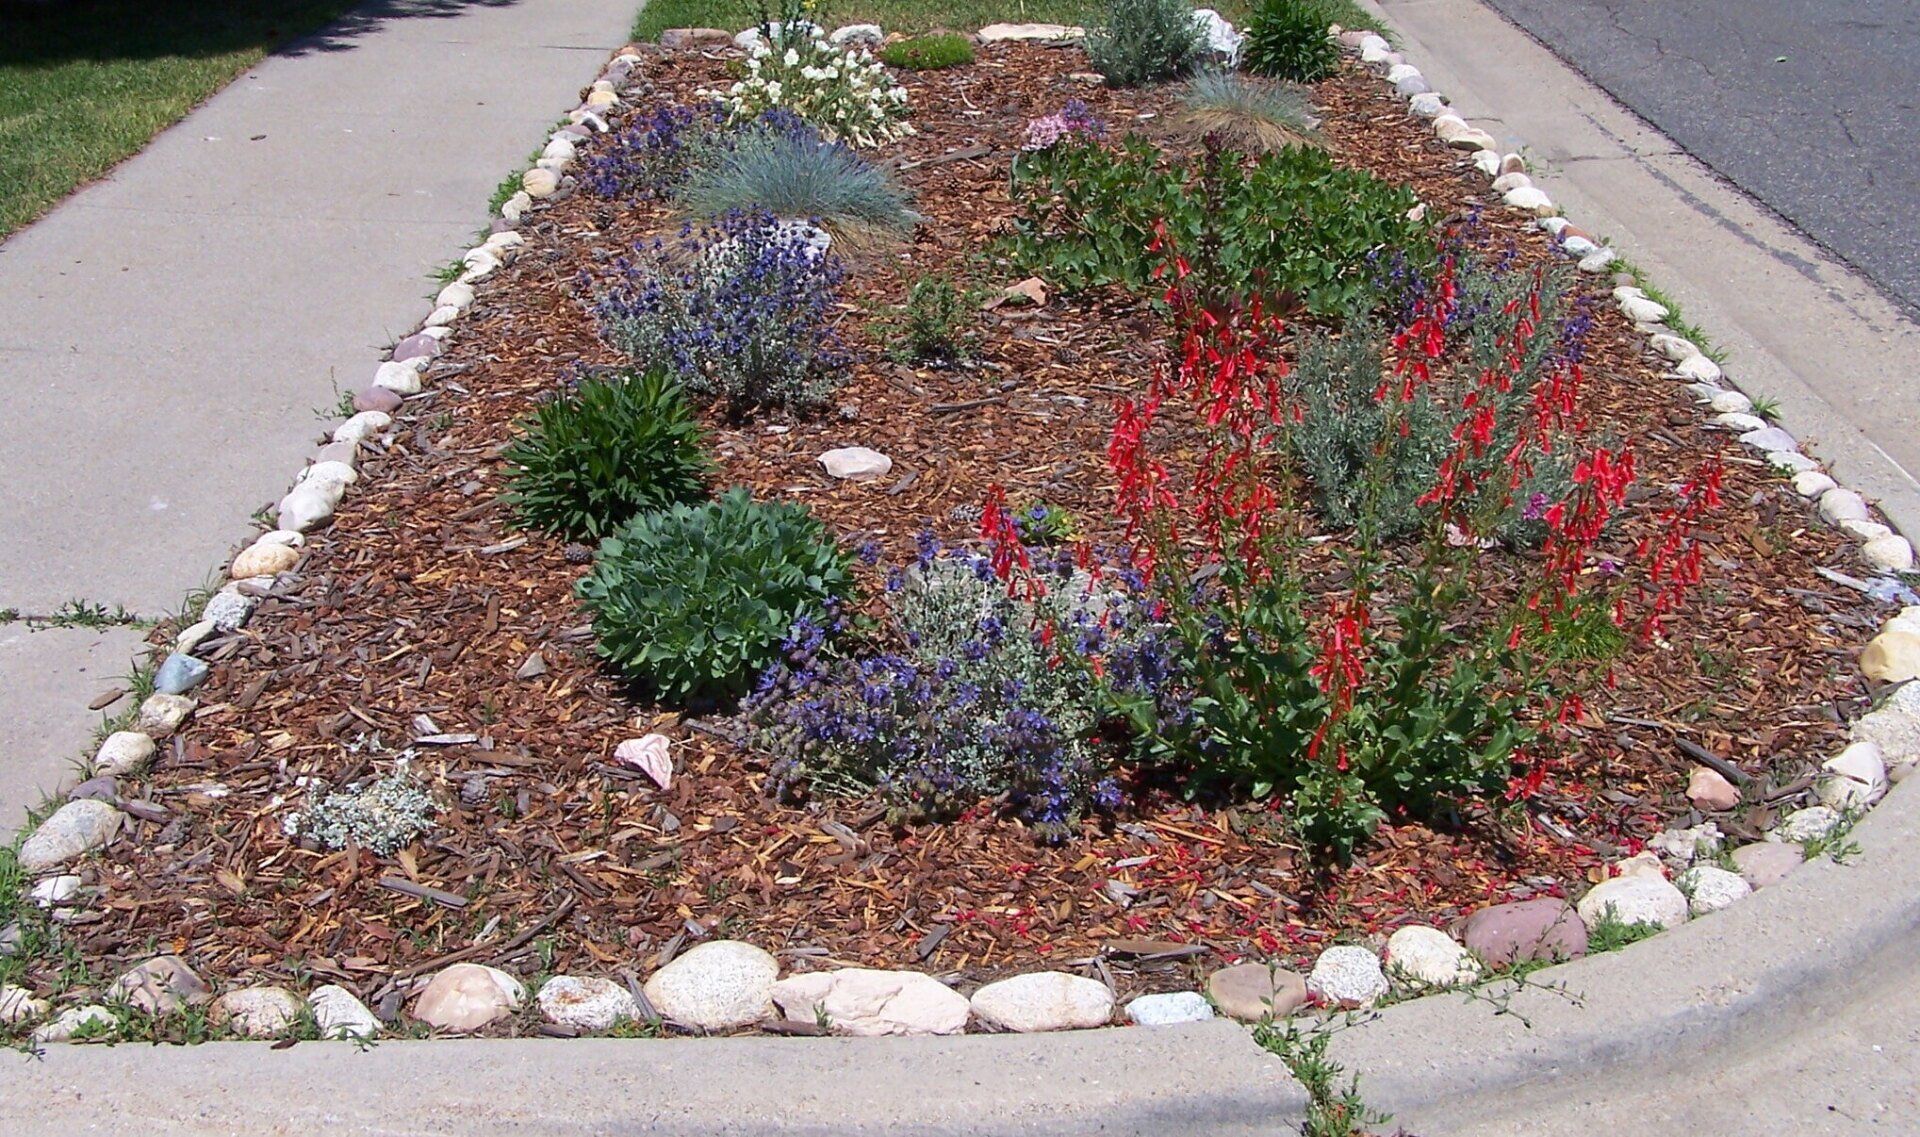 An exquisite xeriscape garden adorned with a diverse array of blooming plants and stones.